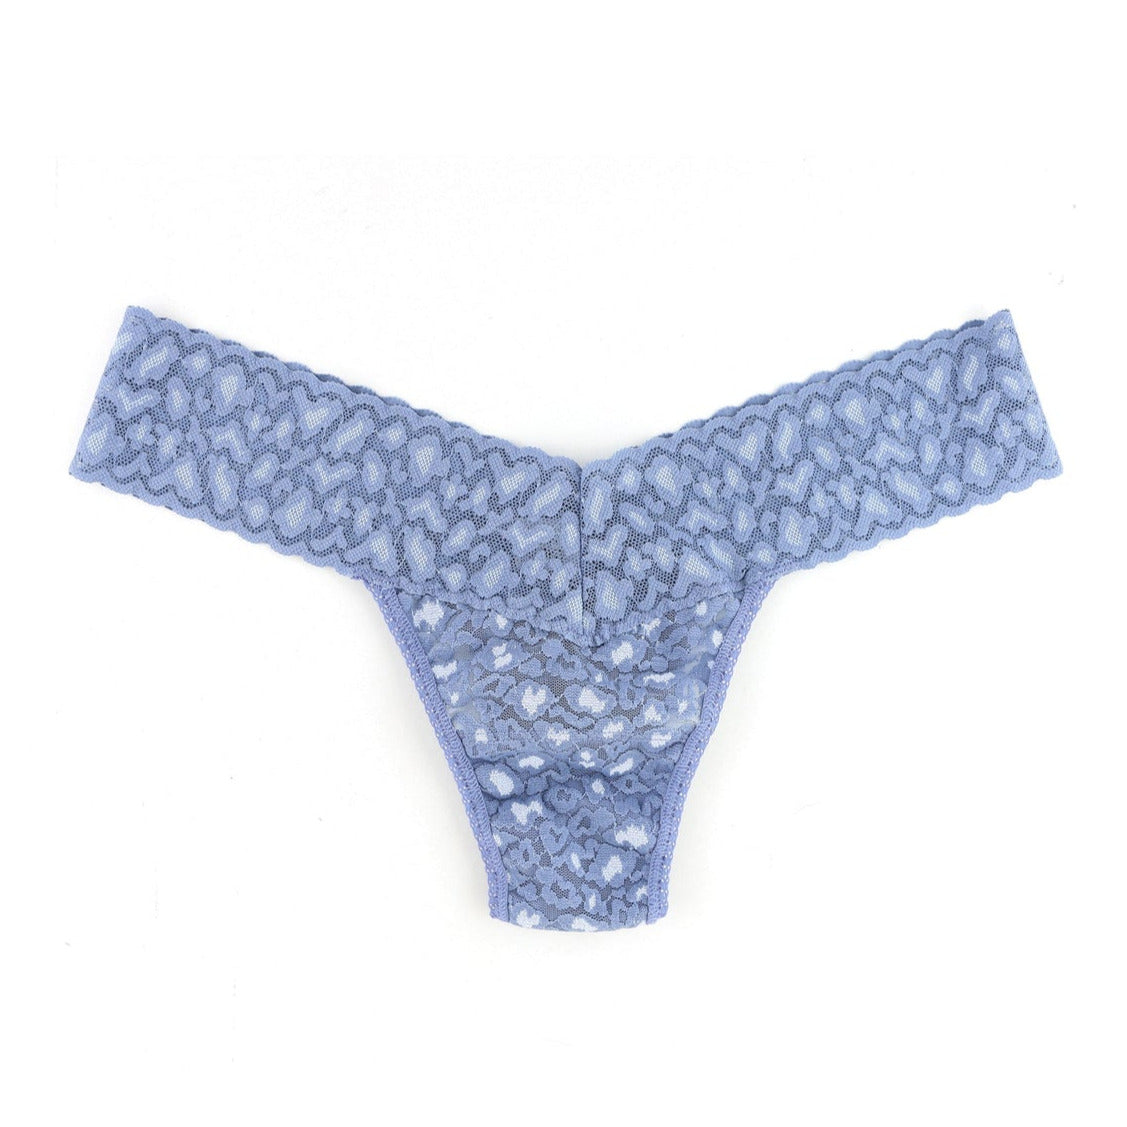 Hanky Panky Cross Dyed Leopard Low Rise Thong